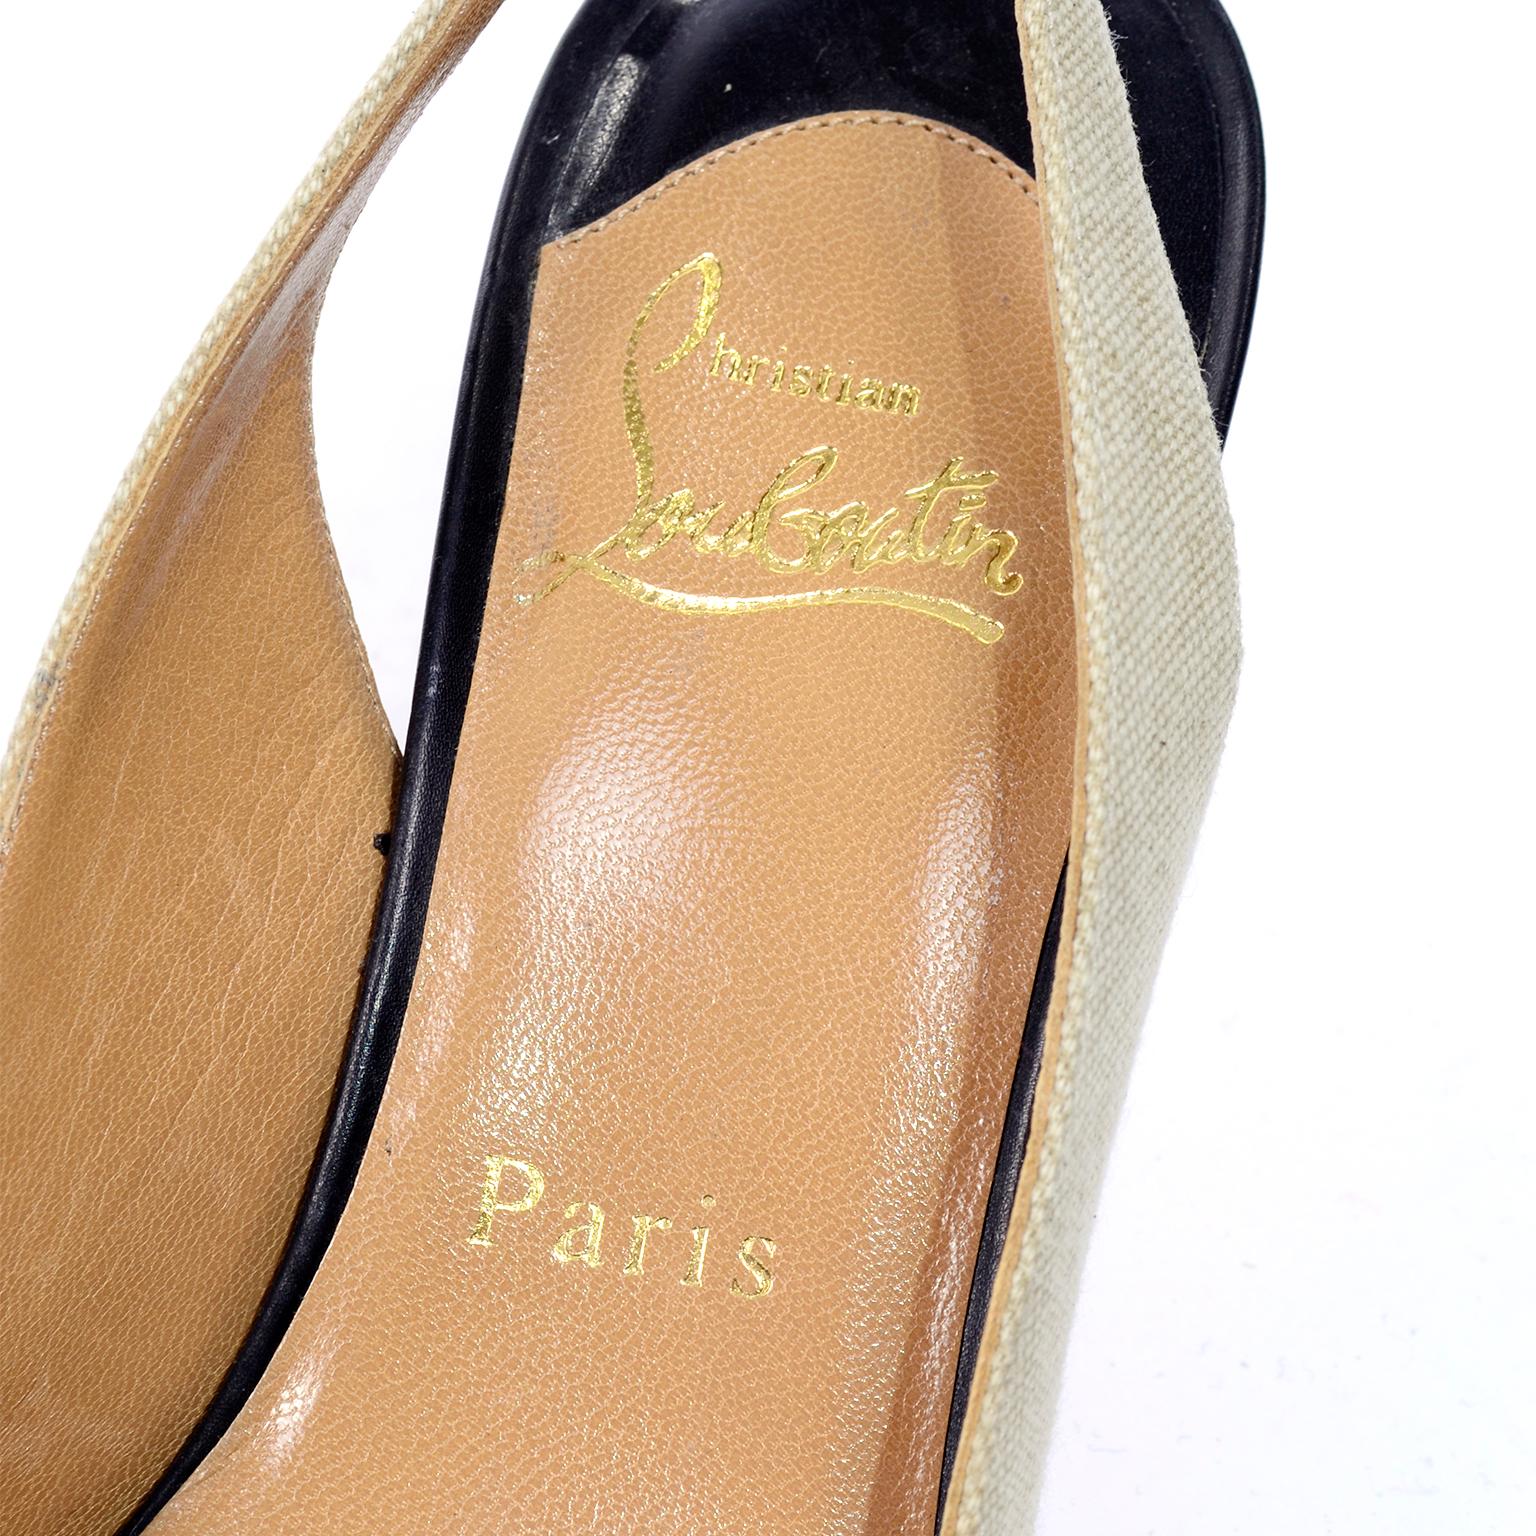 Women's Christian Louboutin Shoes Slingback Heels in Two Tone Black & Natural Size 38.5